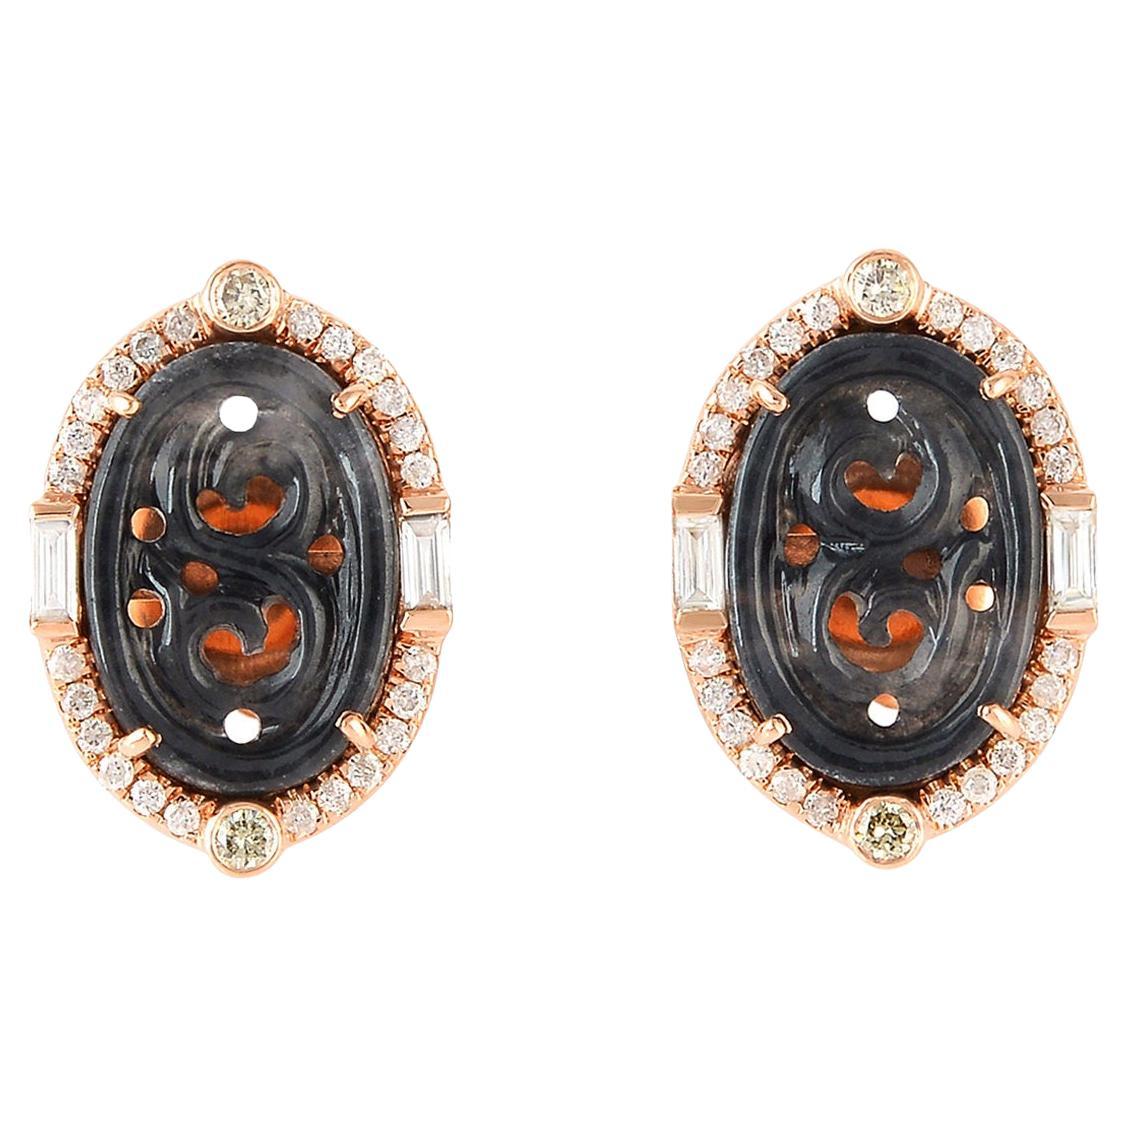 Carved Black Jade Stud Earrings with Pave Diamonds Made in 18k Gold